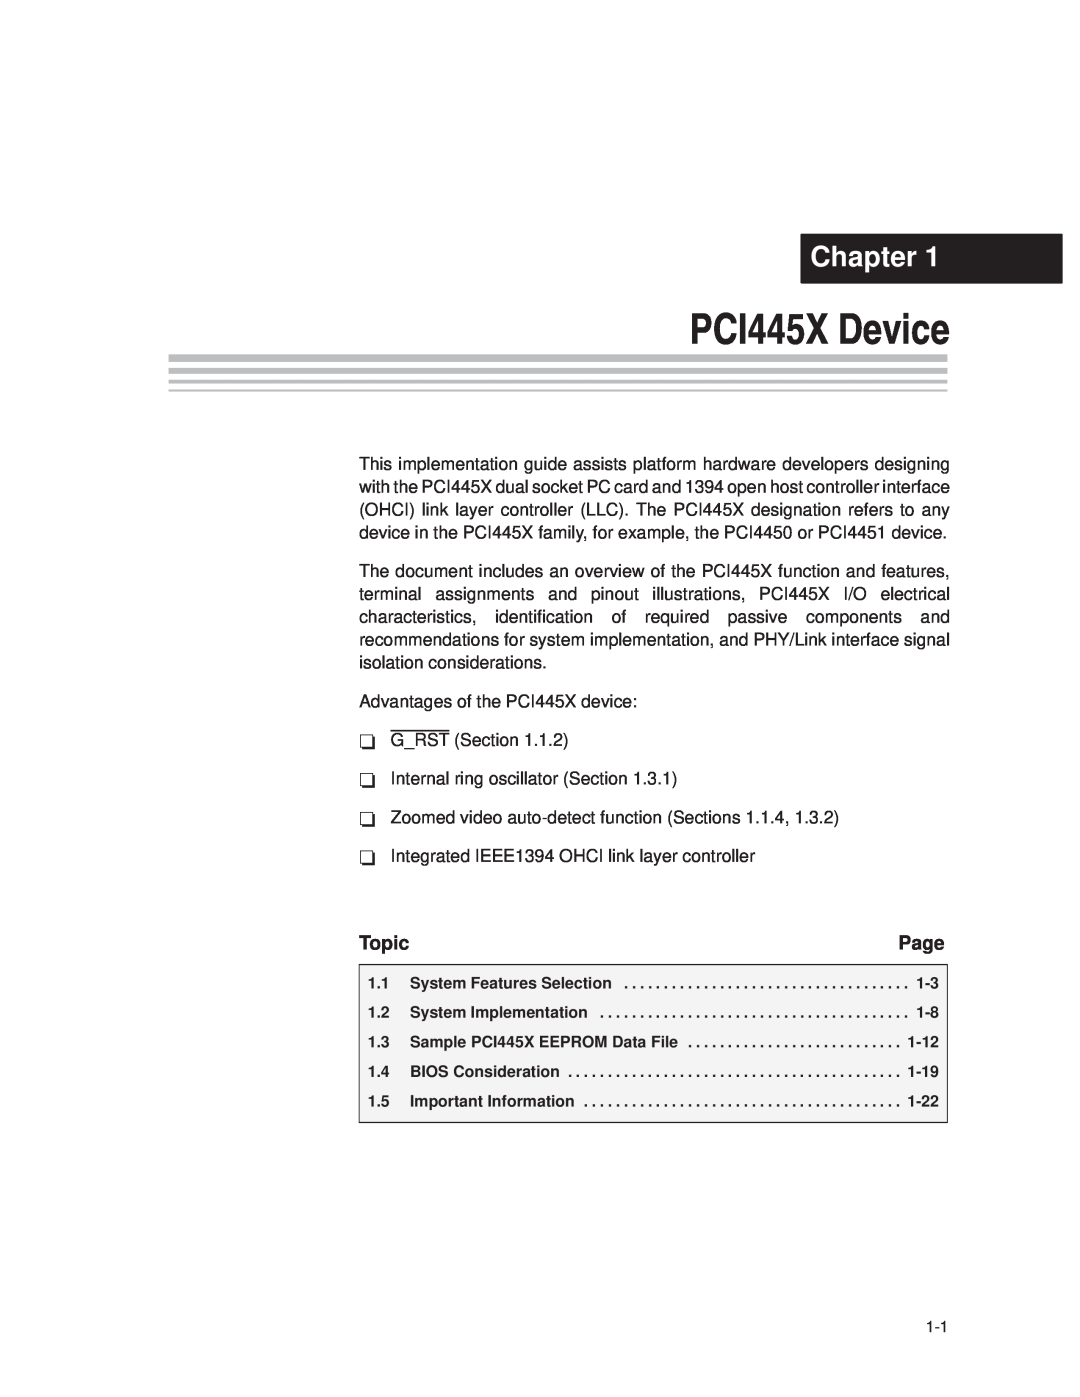 Texas Instruments manual PCI445X Device, Chapter, Page, Topic 